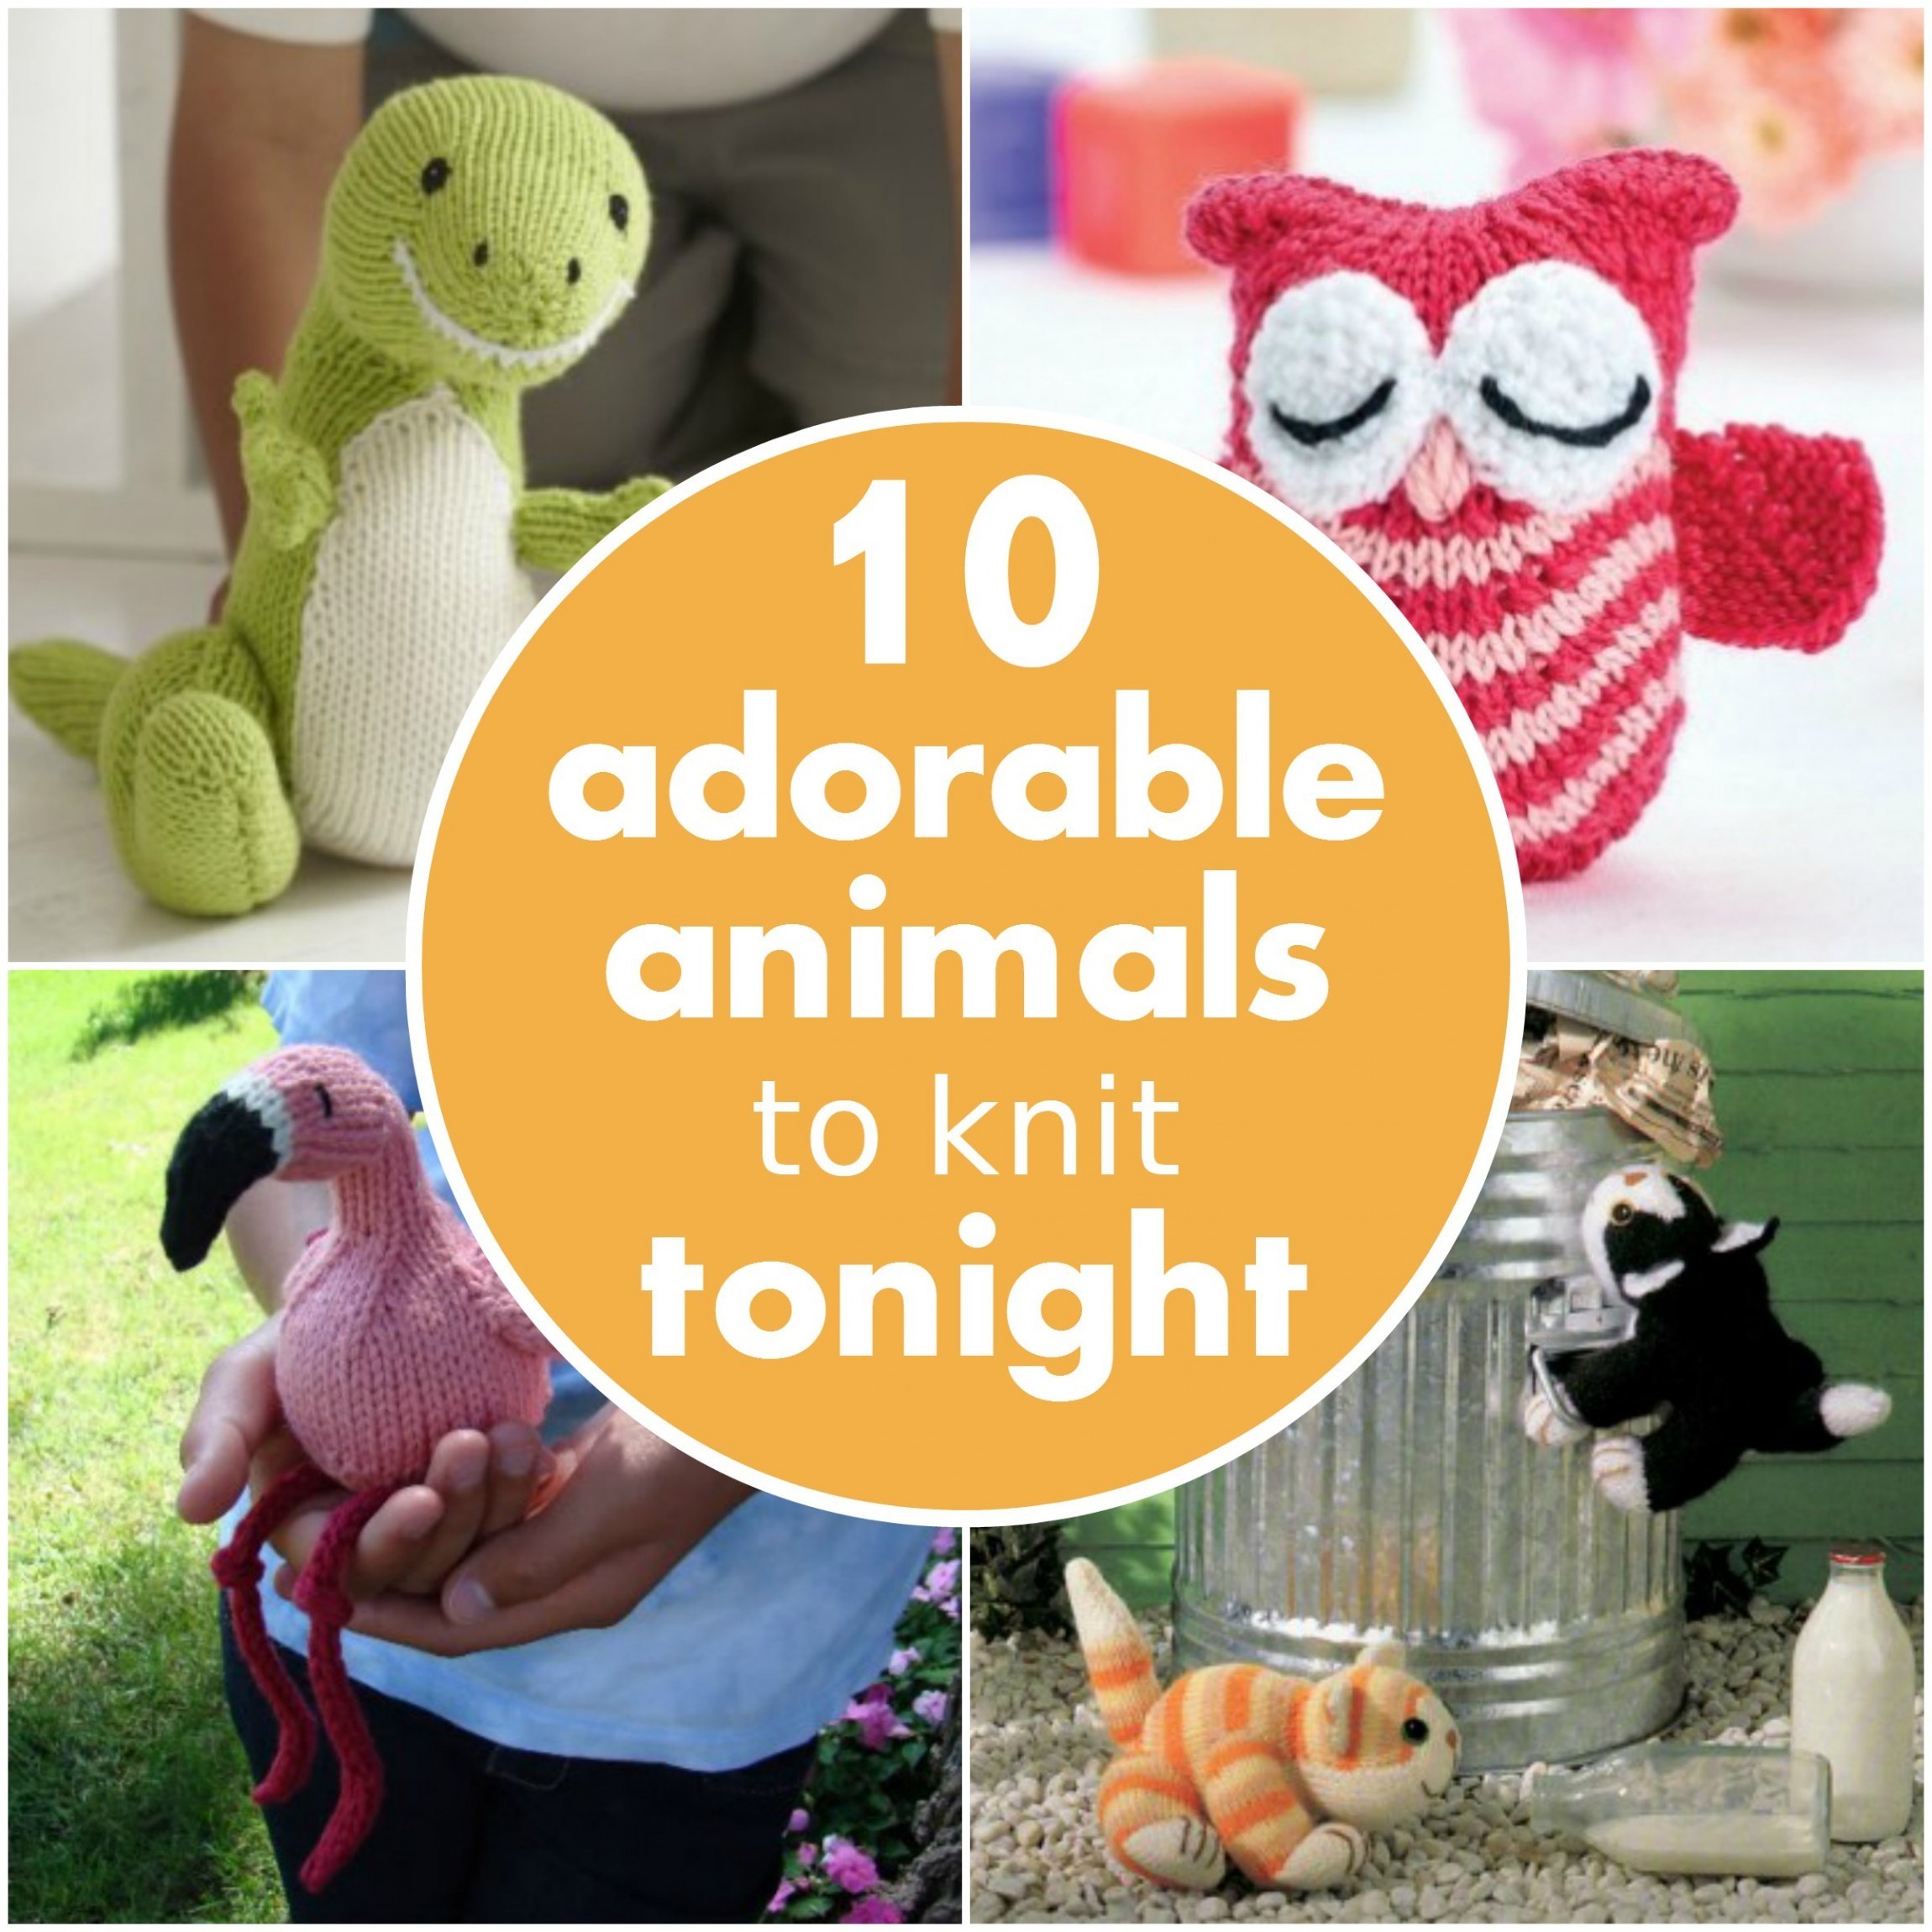 10 adorable animals to knit tonight | Blog | Let\'s Knit Magazine